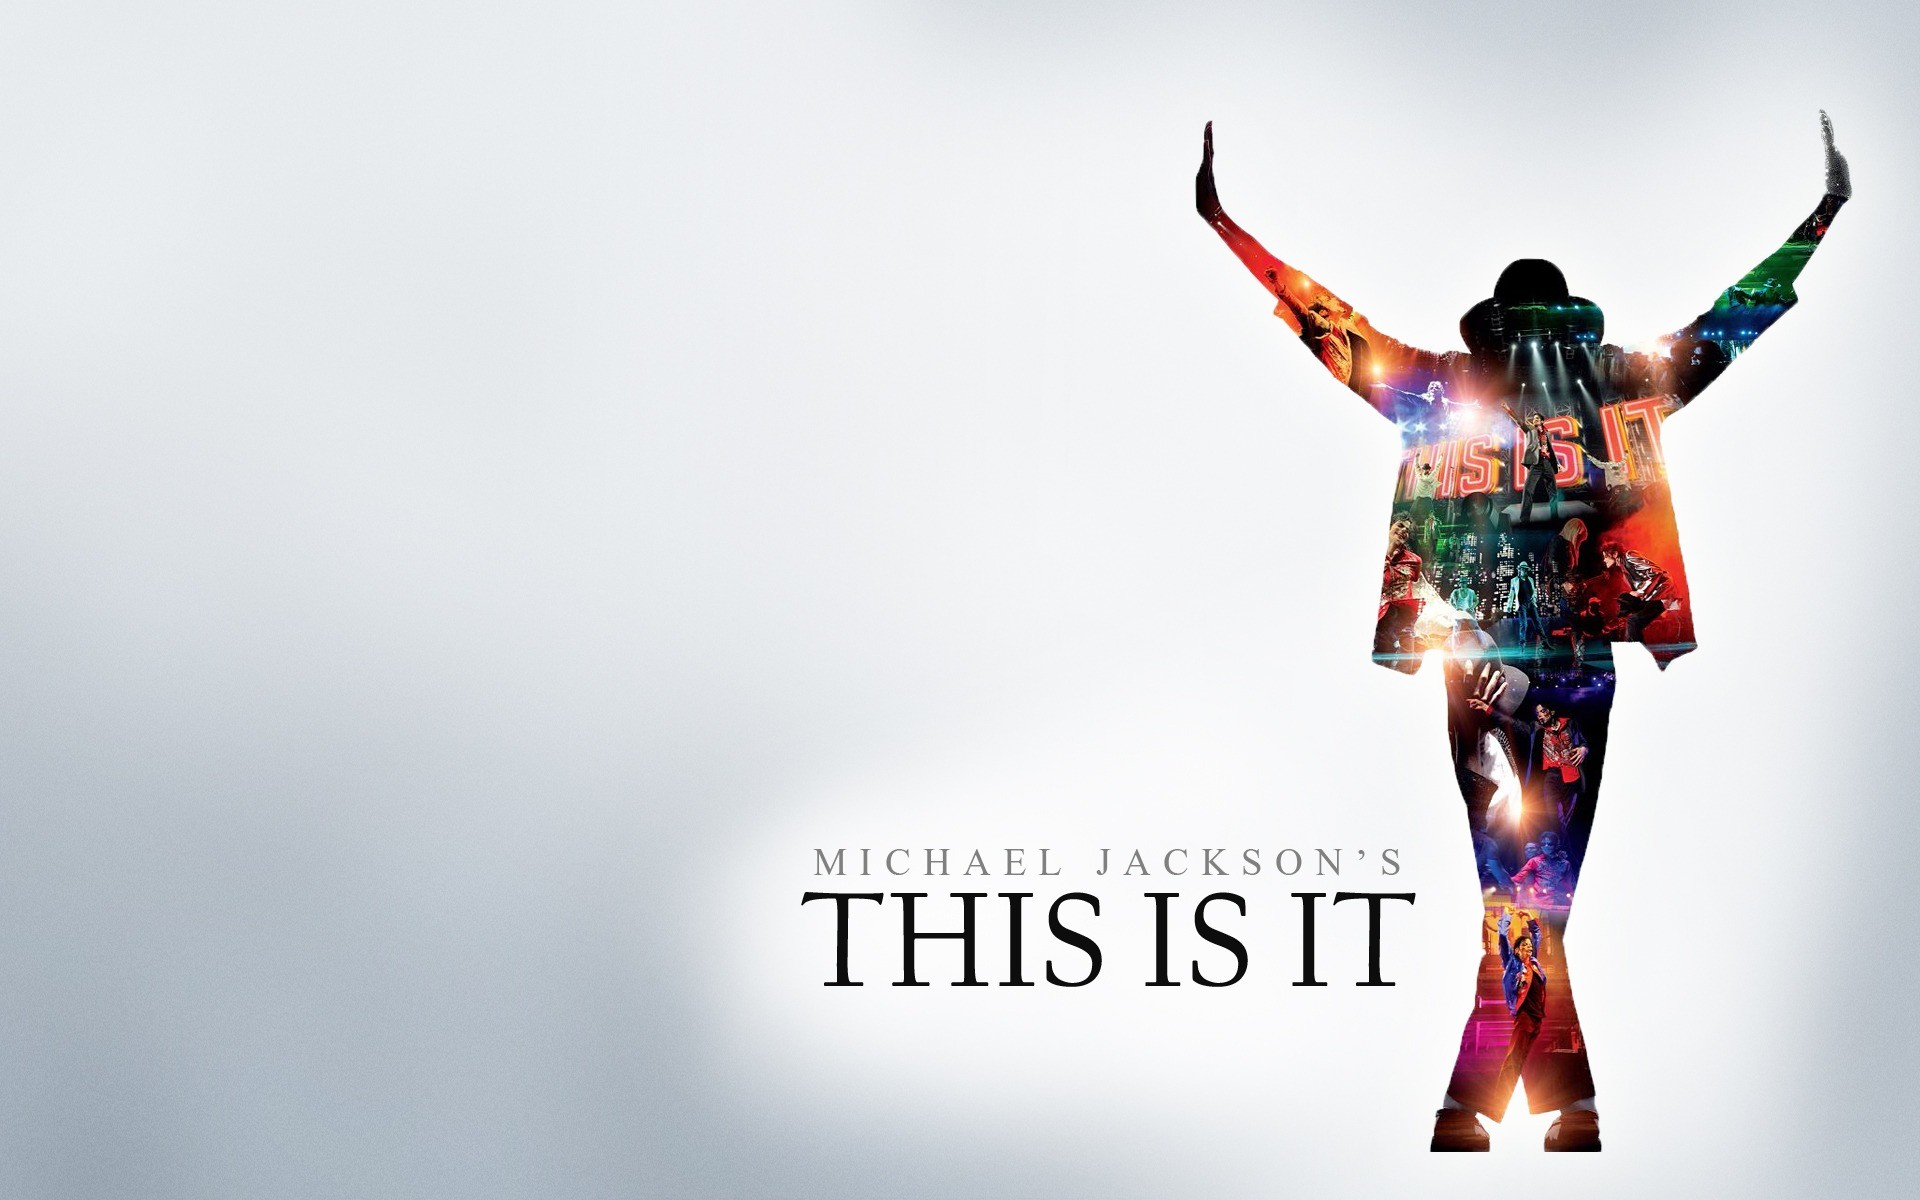 1920x1200 Michael Jackson HD Wallpapers Backgrounds Wallpaper | HD Wallpapers |  Pinterest | Michael jackson images, Hd wallpaper and Wallpaper